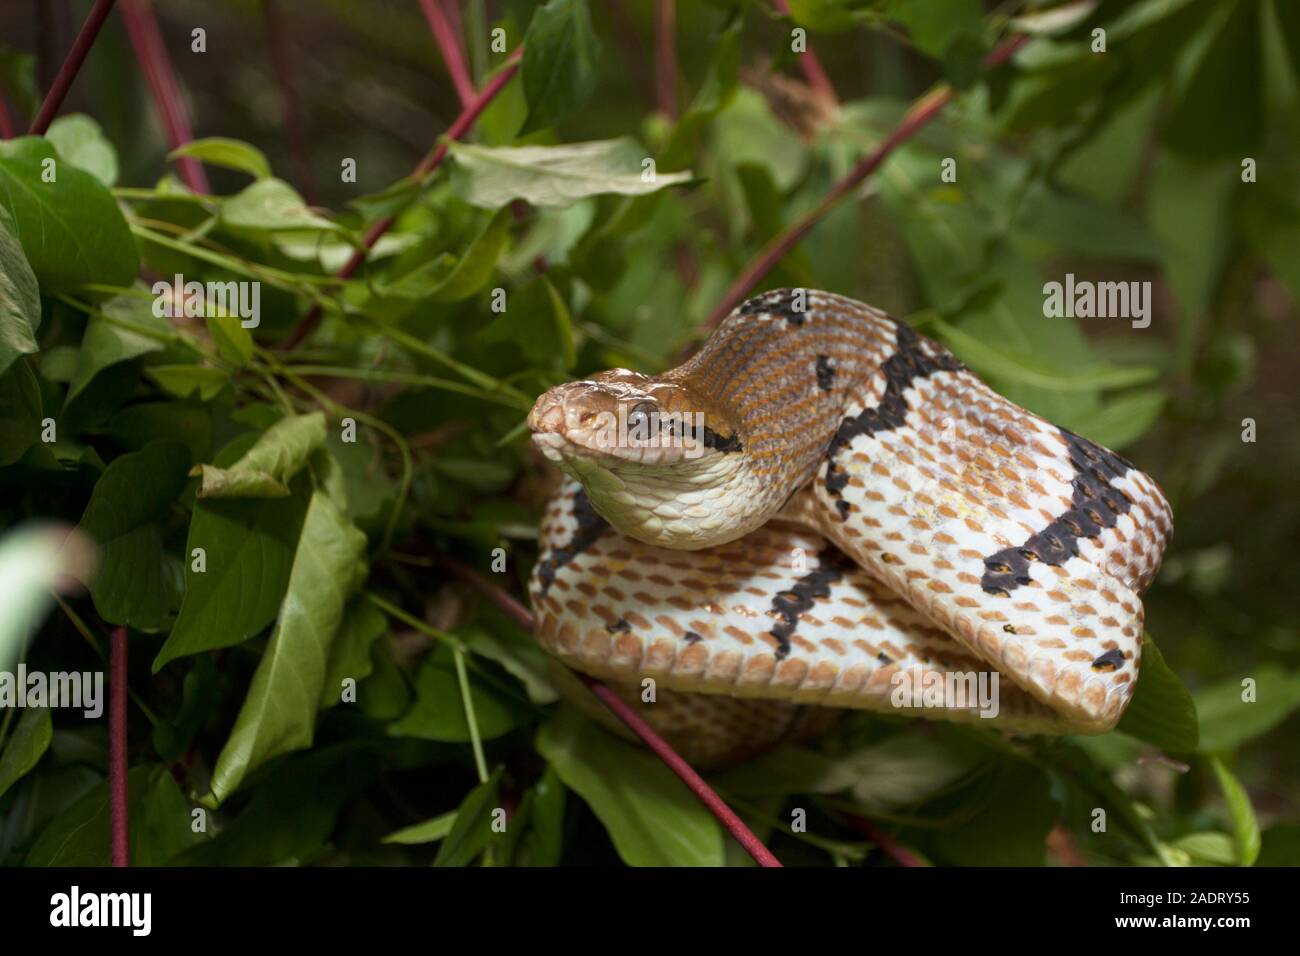 Boiga cynodon, commonly known as the dog-toothed cat snake Stock Photo